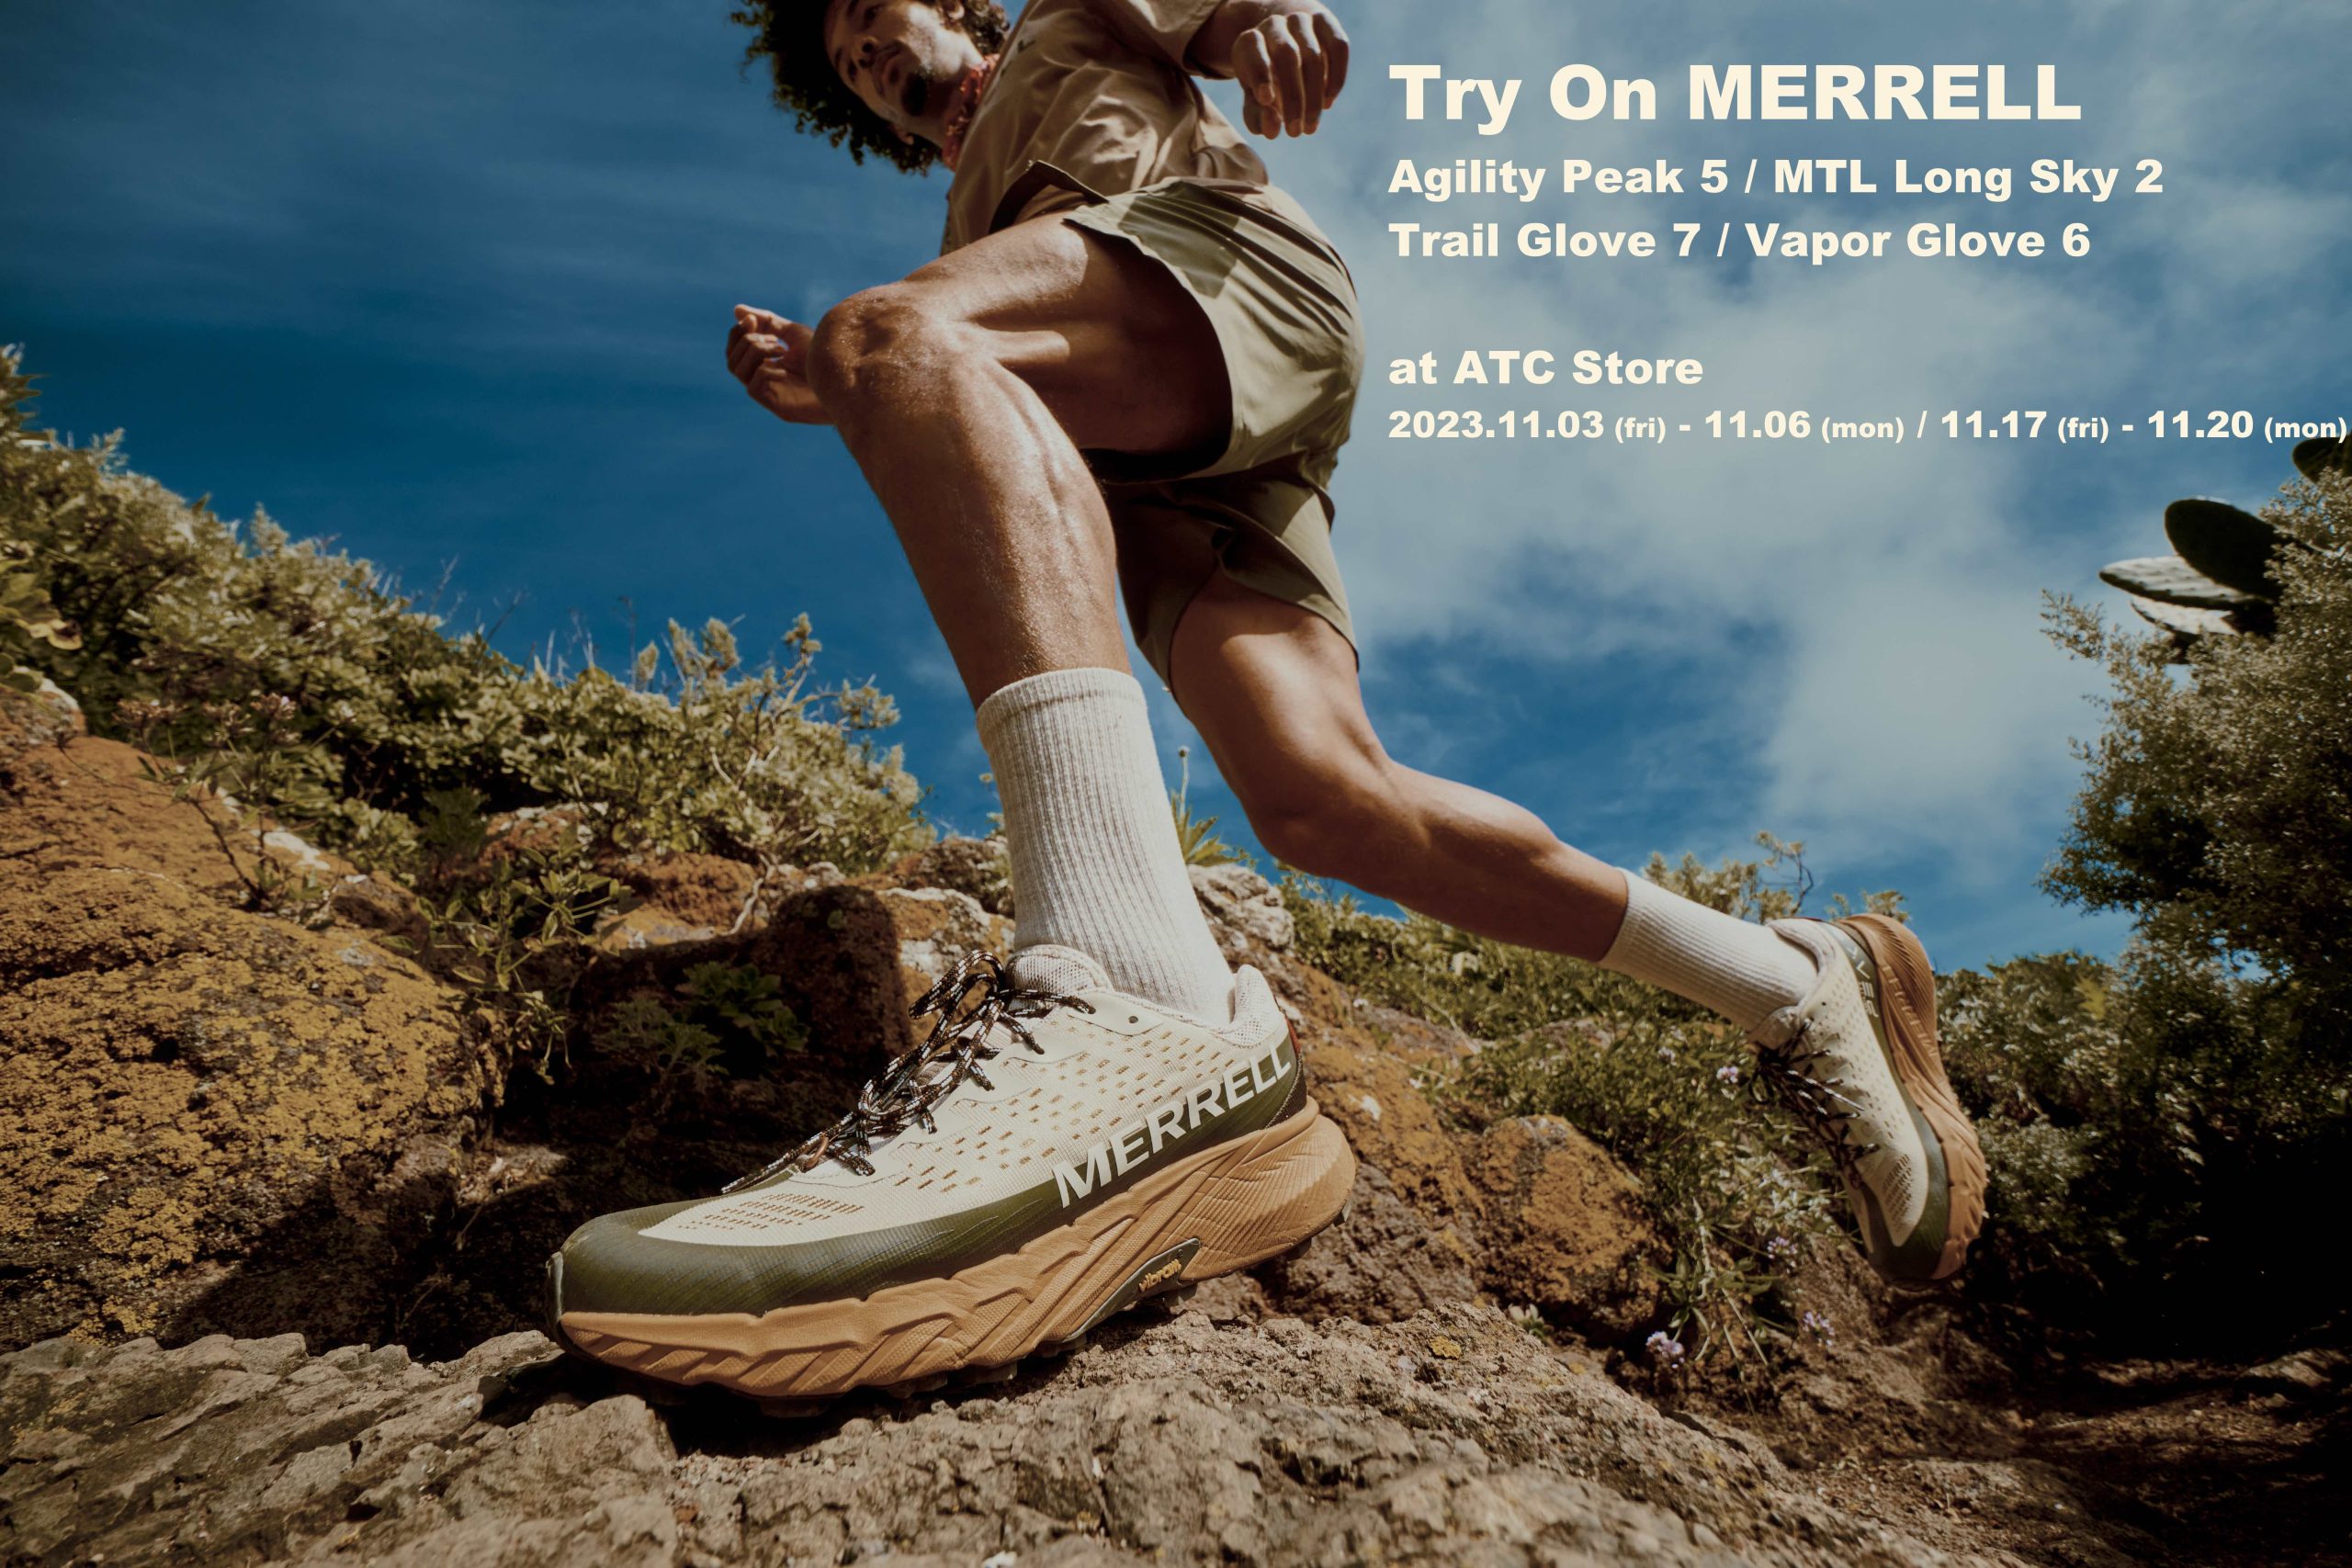 Try On MERRELL!! – ATC Store